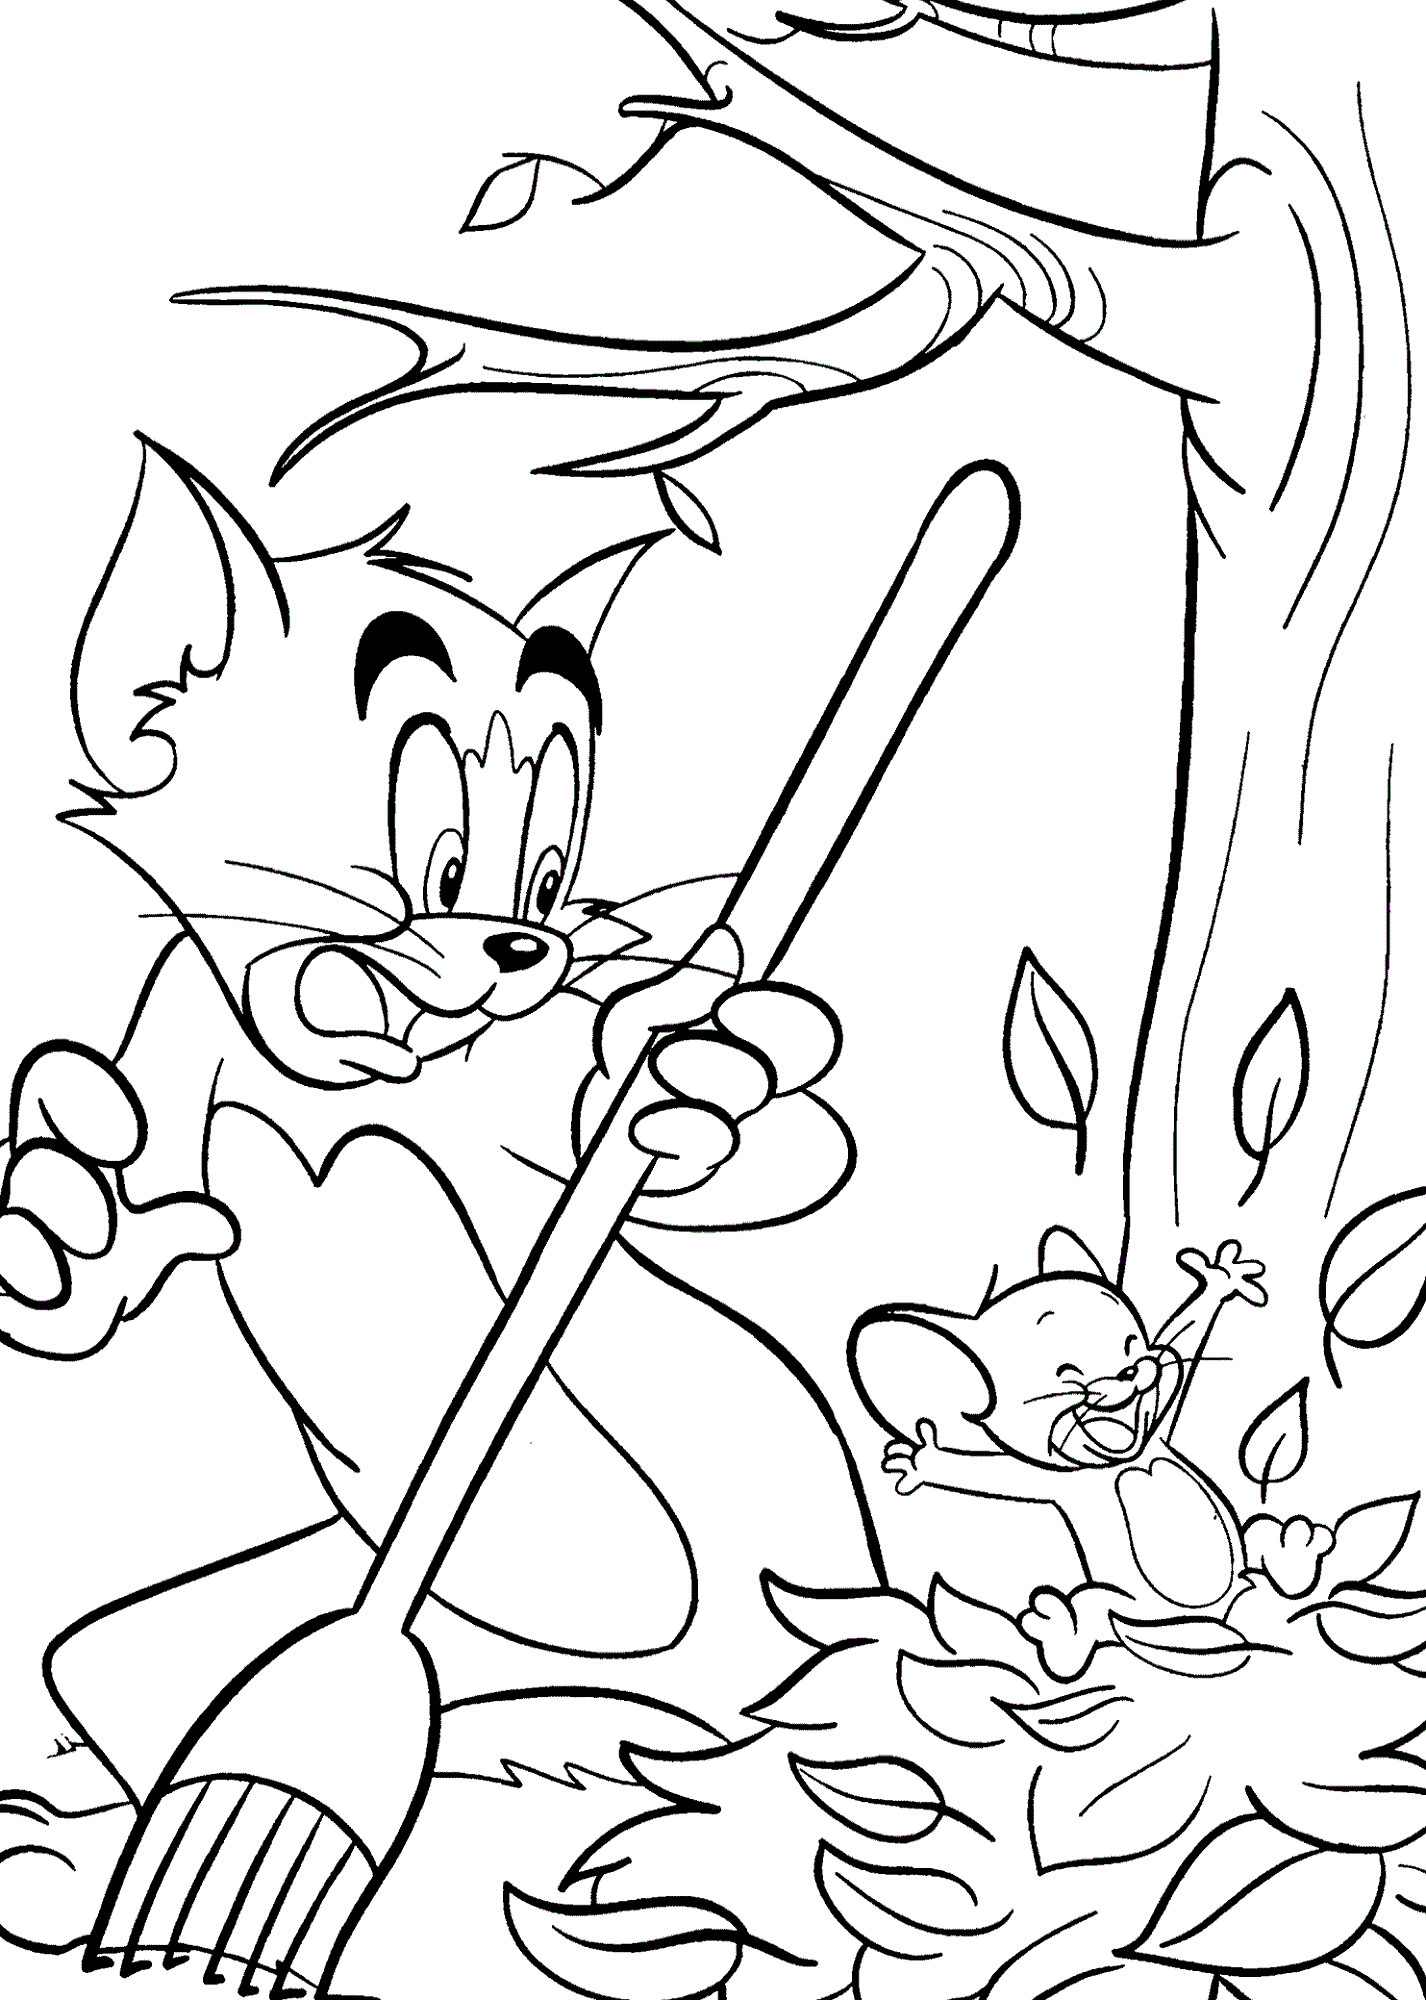 Coloring Pages For Kids Fall
 Fall Coloring Pages for Kindergarten